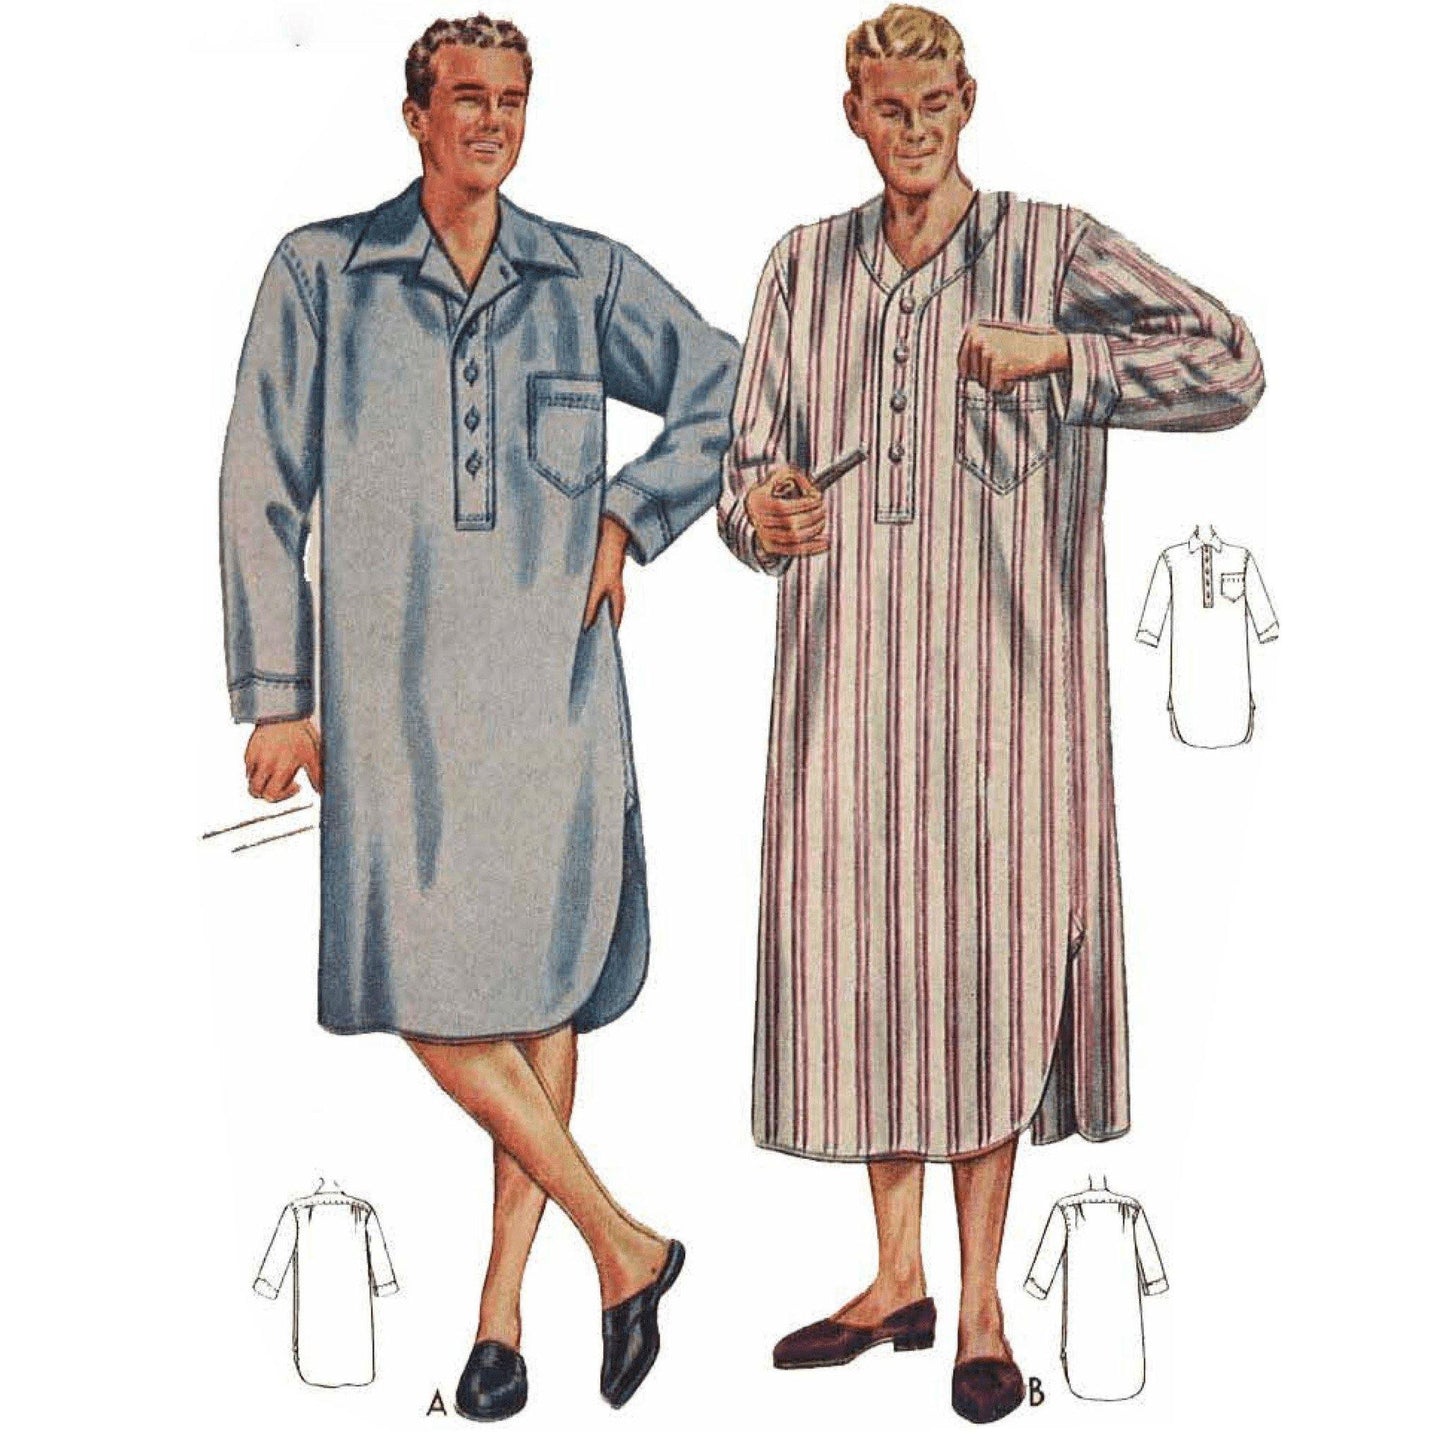 men wearing 3/4 and long length nightshirts made from Sewing pattern McCall's 4473. One man in shorter nightshirt in blue has a hand on his hip, the other man has blonde hair, a red and white striped longer length nightshirt  is holding a pipe.